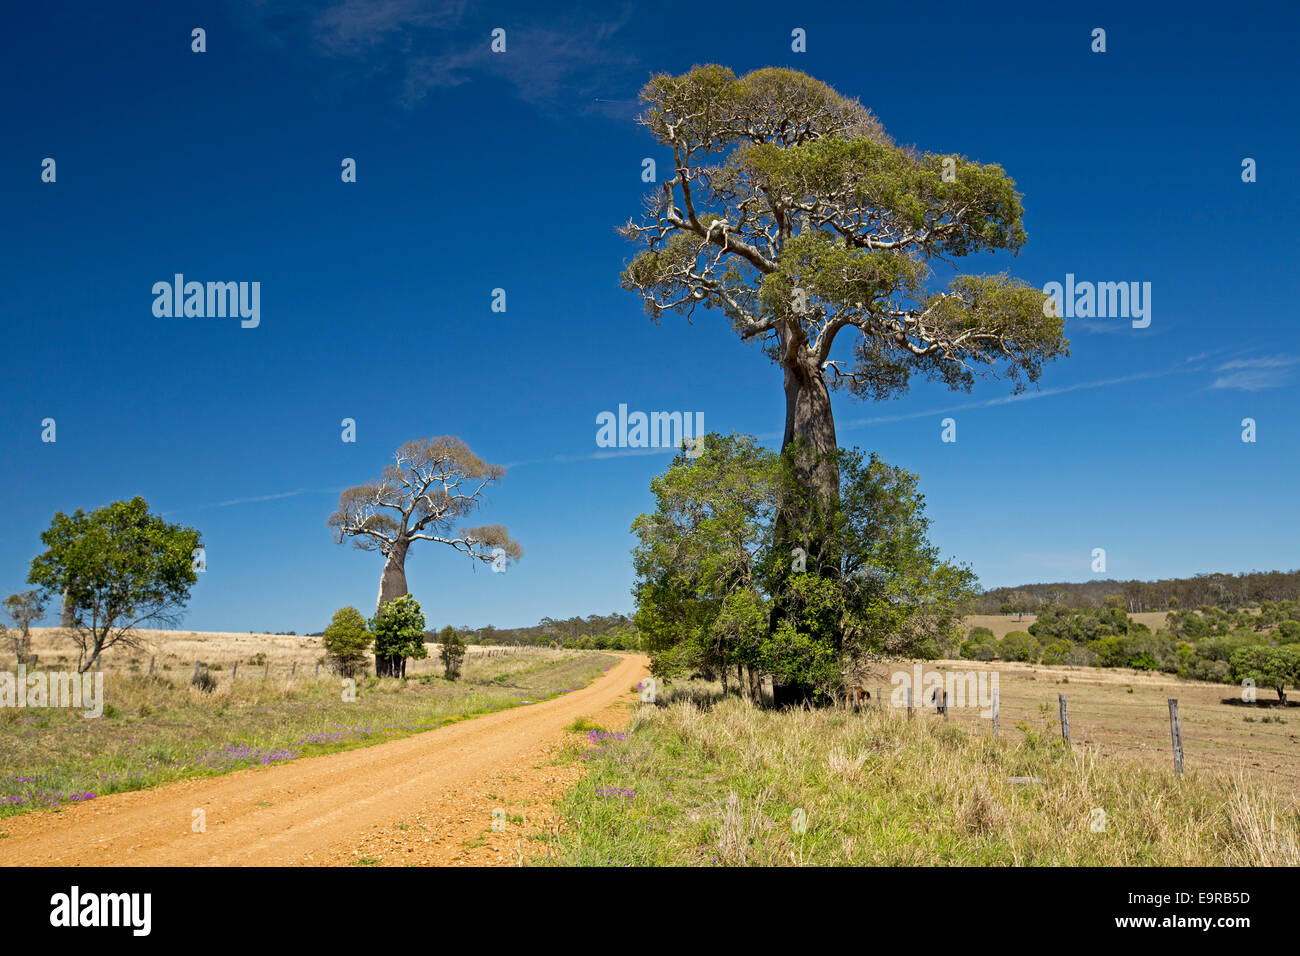 Narrow dirt road across Australian landscape with native bottle trees, Brachychiton rupestris, reaching from plains to blue sky Stock Photo